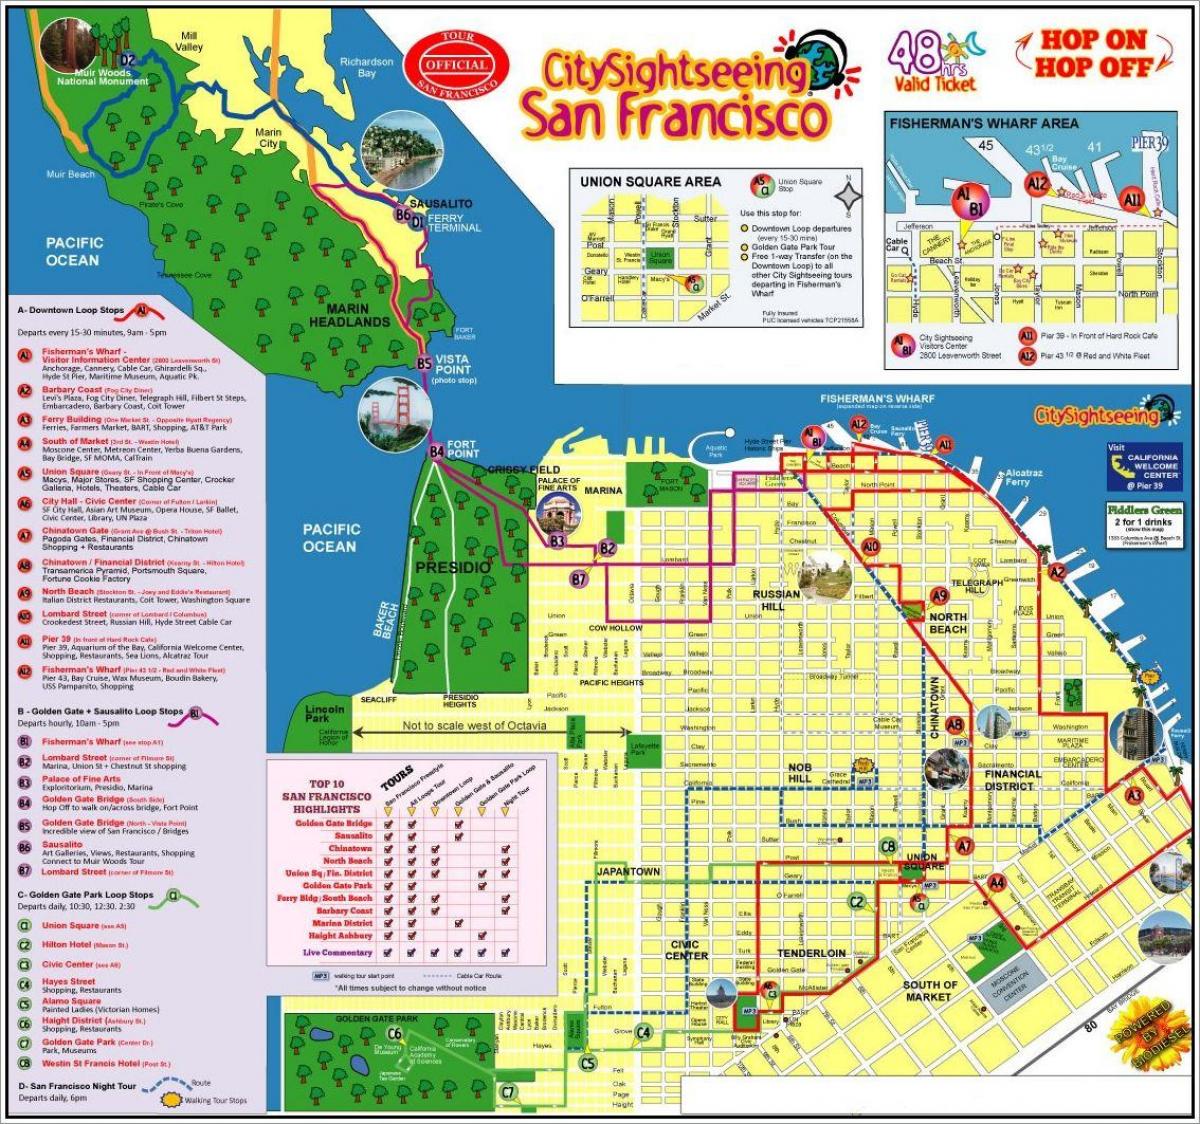 San Francisco hop on hop off tour in autobus mappa